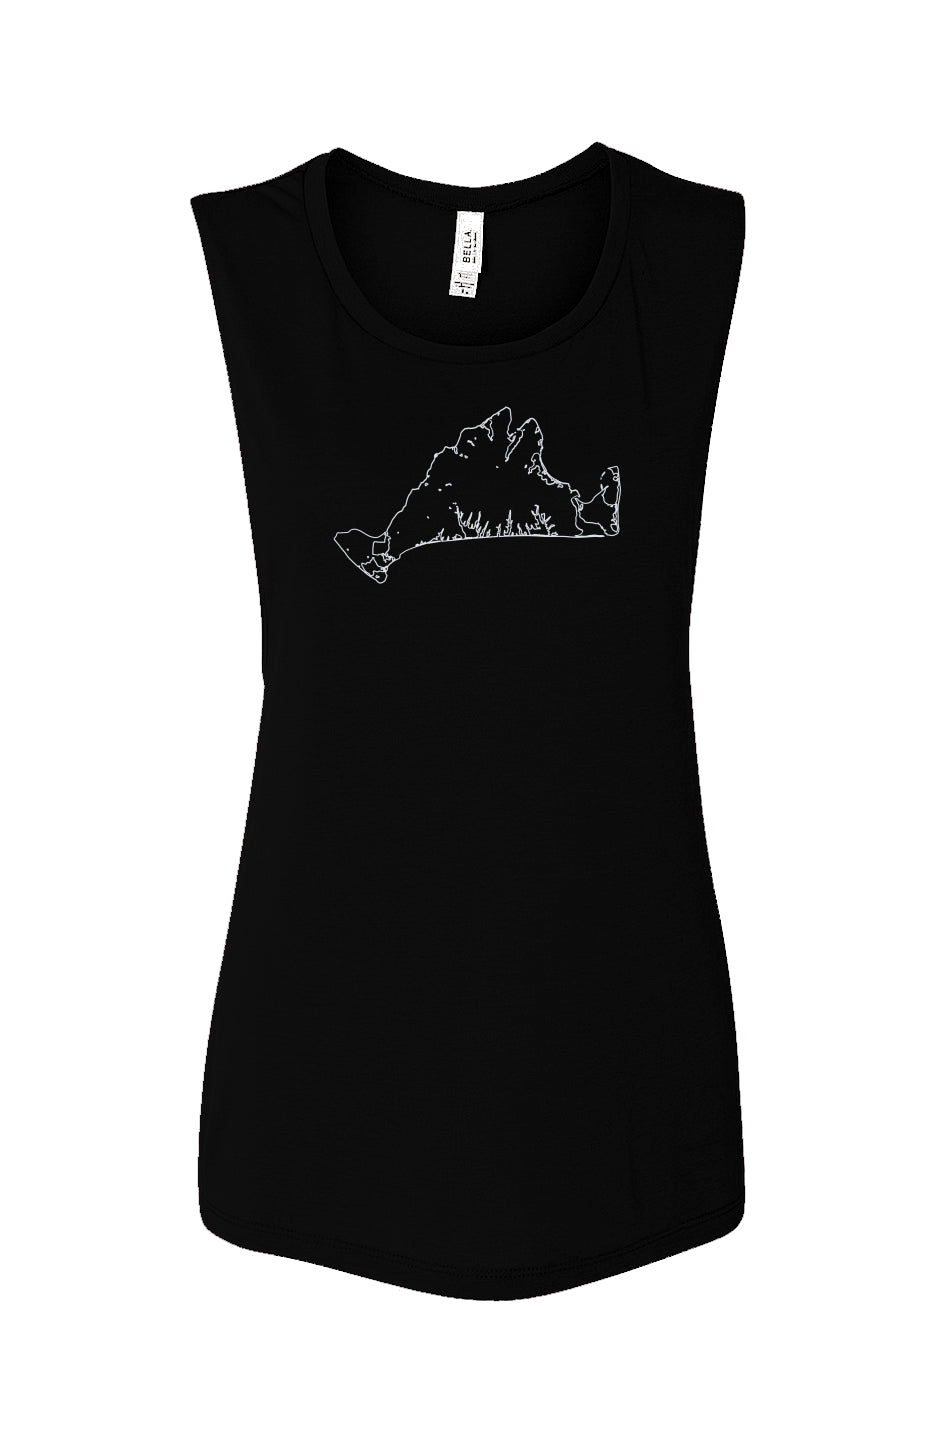 Island Outline Womens Muscle Tank